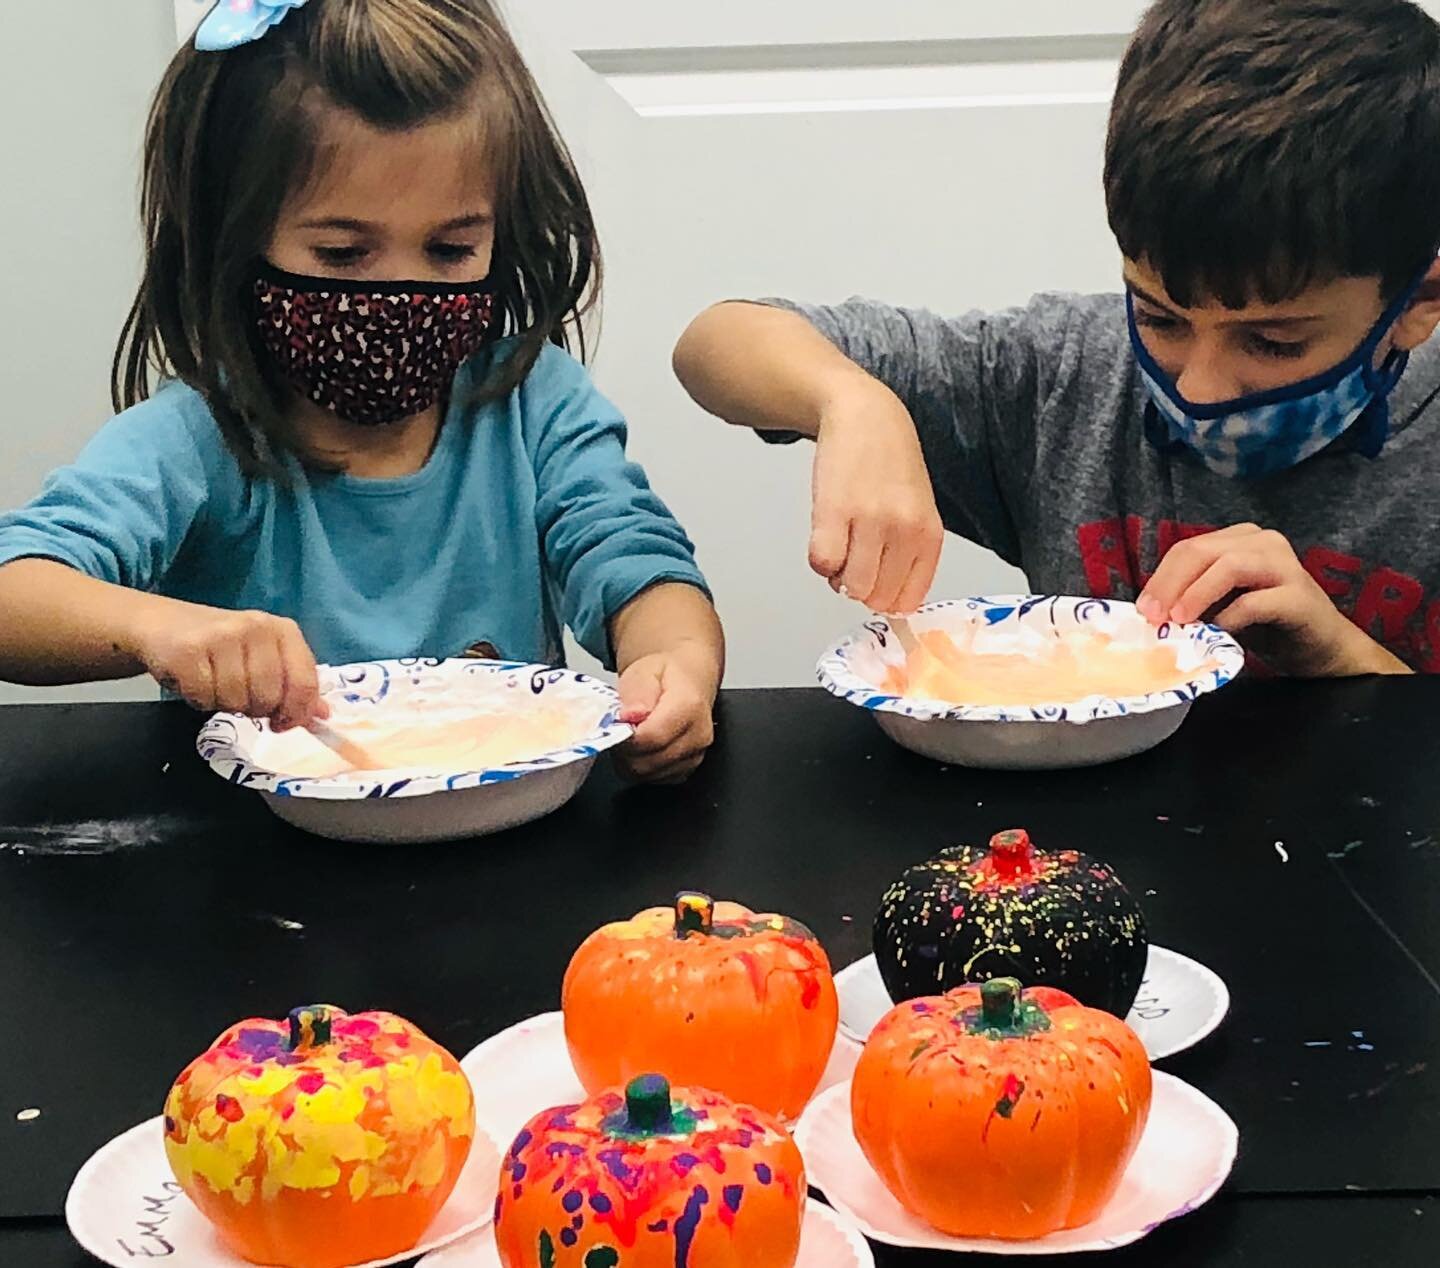 Pumpkin painting and pumpkin slime make for a great day off from school!